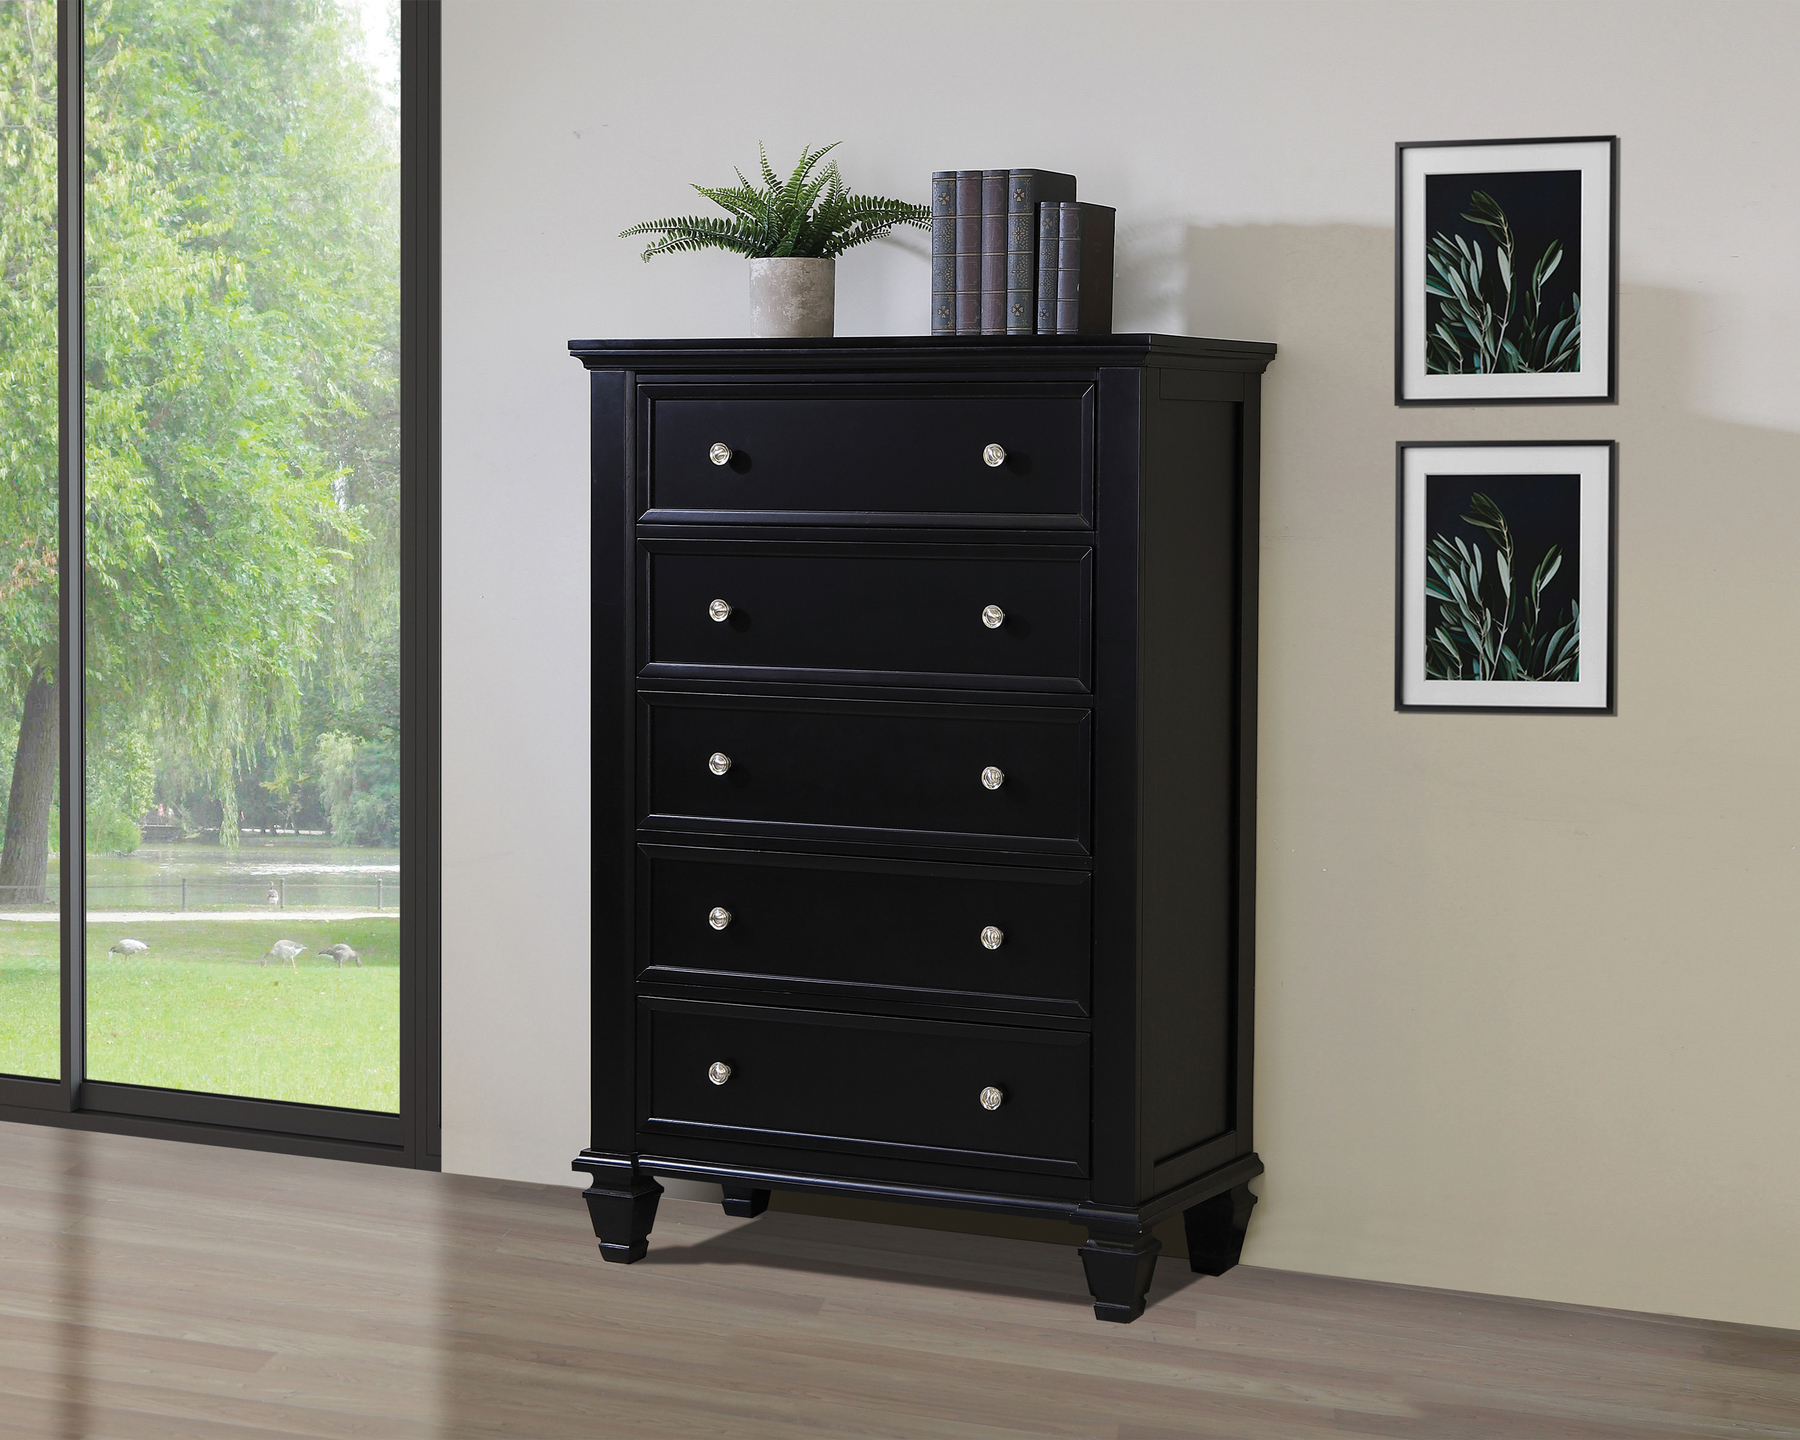 Display Unit in Sandy Black Finish by Coaster Furniture 